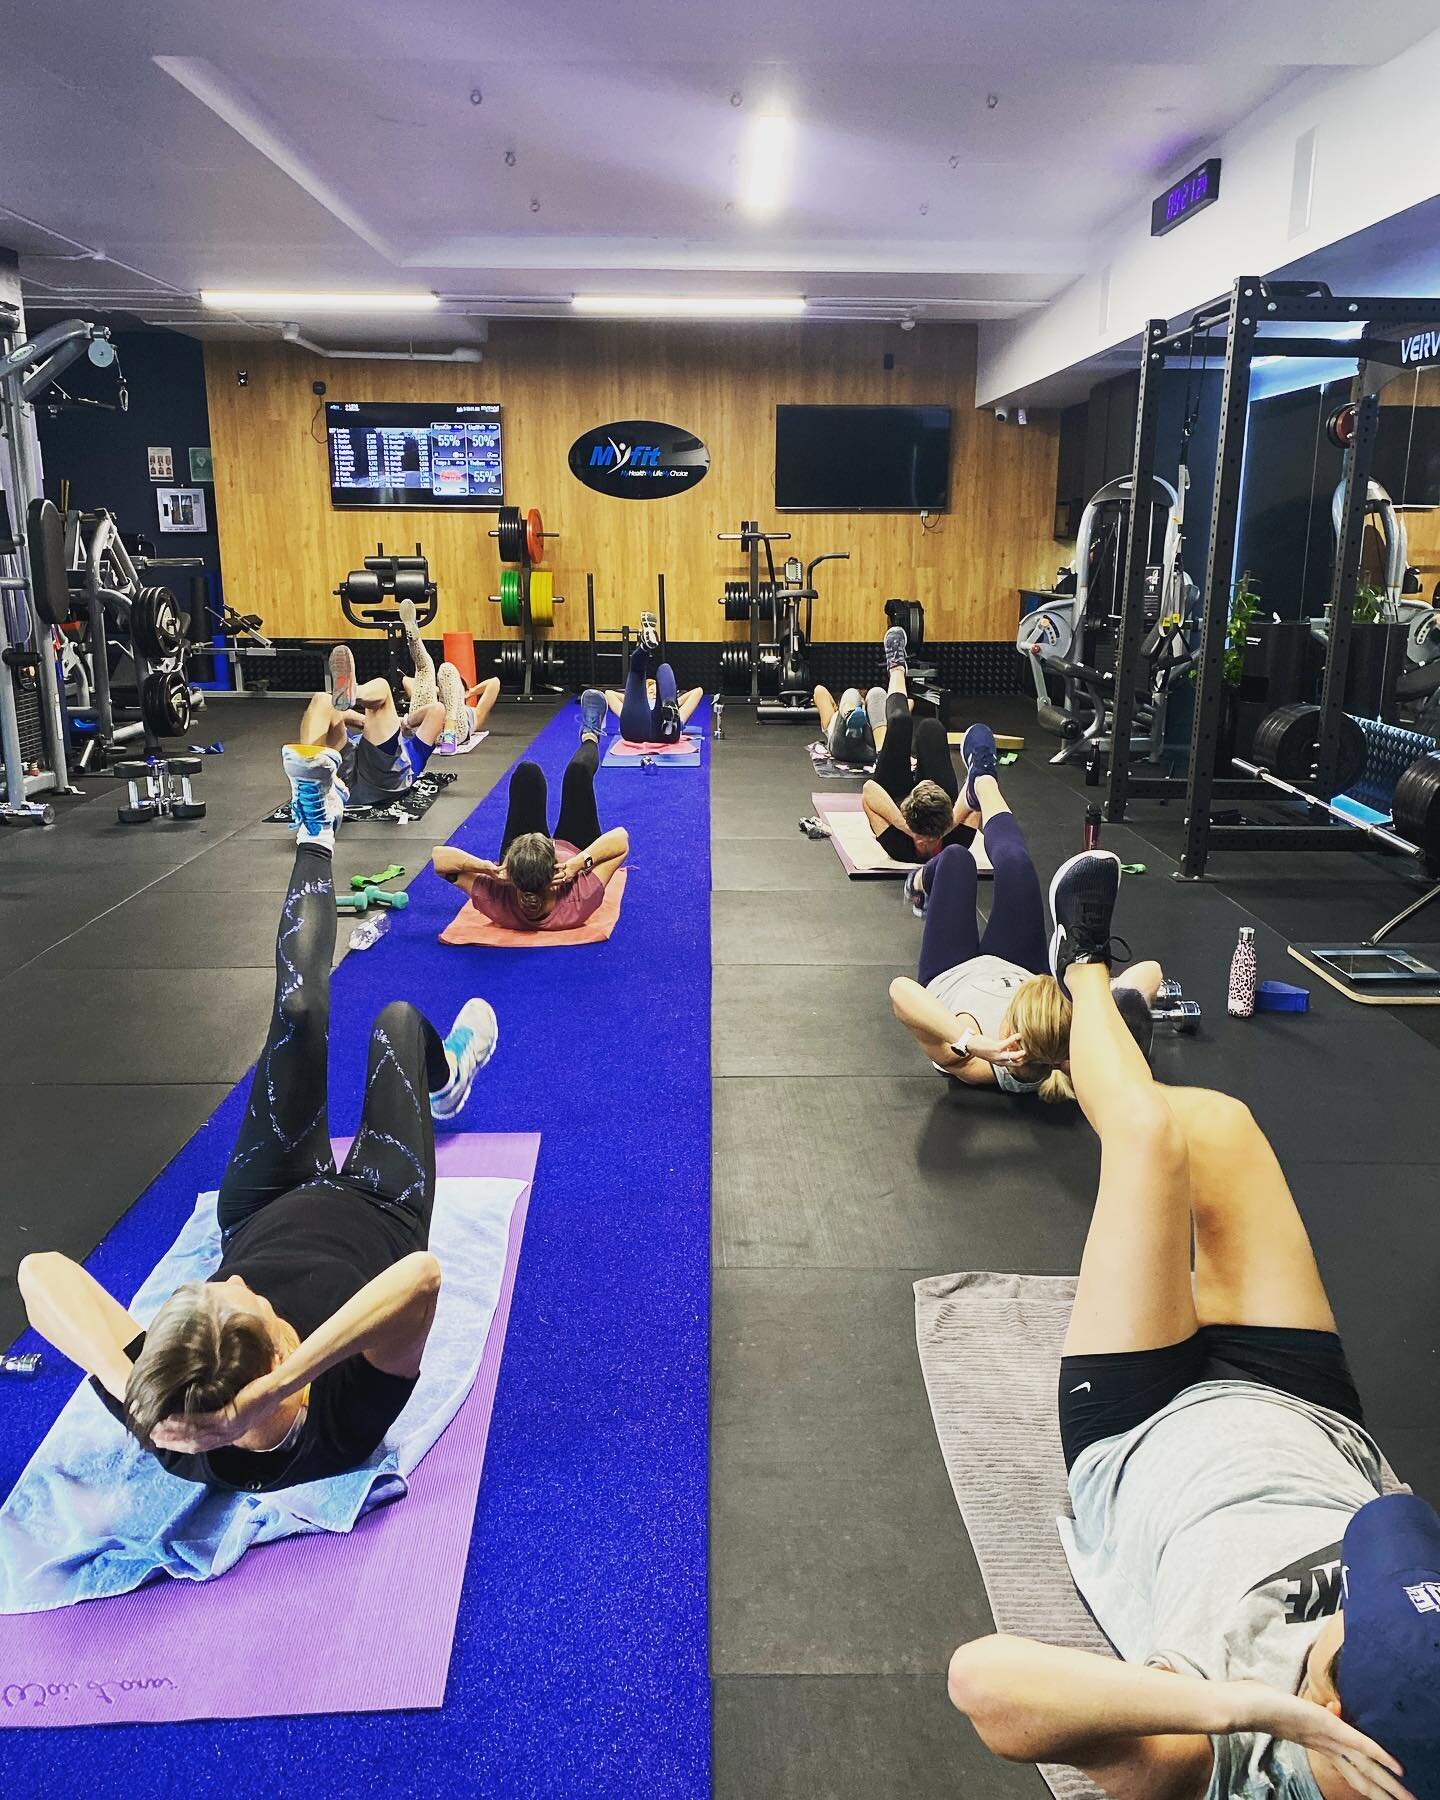 Have you checked out our class timetable? 
We have classes got all ages, all abilities and all goals! 🏋🏽
Seniors, low intensity, high intensity, boxing and more 🤩
Find us on the Mindbody app and book in 🥊
.
.
.
#goldcoast #gym #carrara #emeraldla